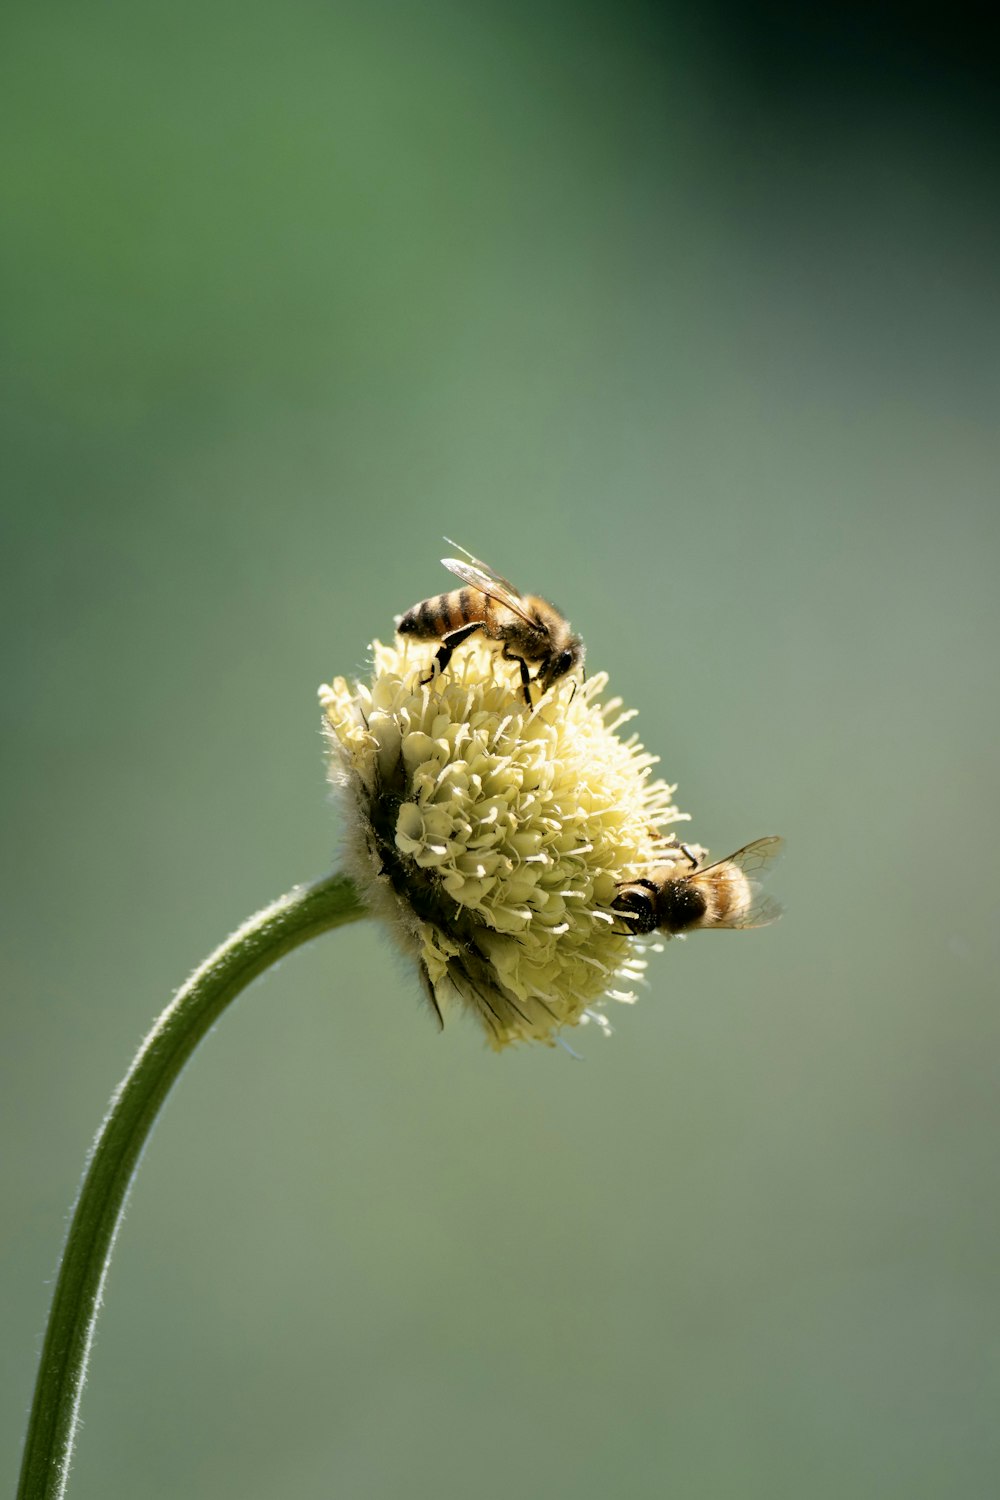 two bees are sitting on a yellow flower